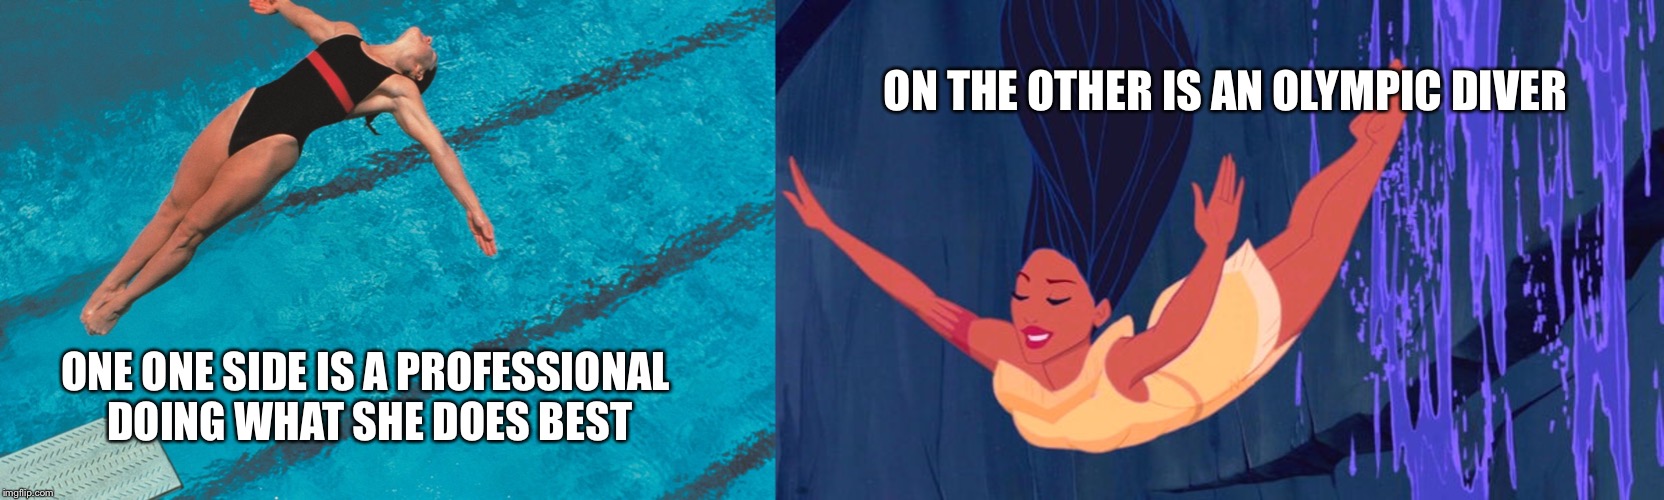 ON THE OTHER IS AN OLYMPIC DIVER; ONE ONE SIDE IS A PROFESSIONAL DOING WHAT SHE DOES BEST | image tagged in disney,olympics,pocahontas | made w/ Imgflip meme maker